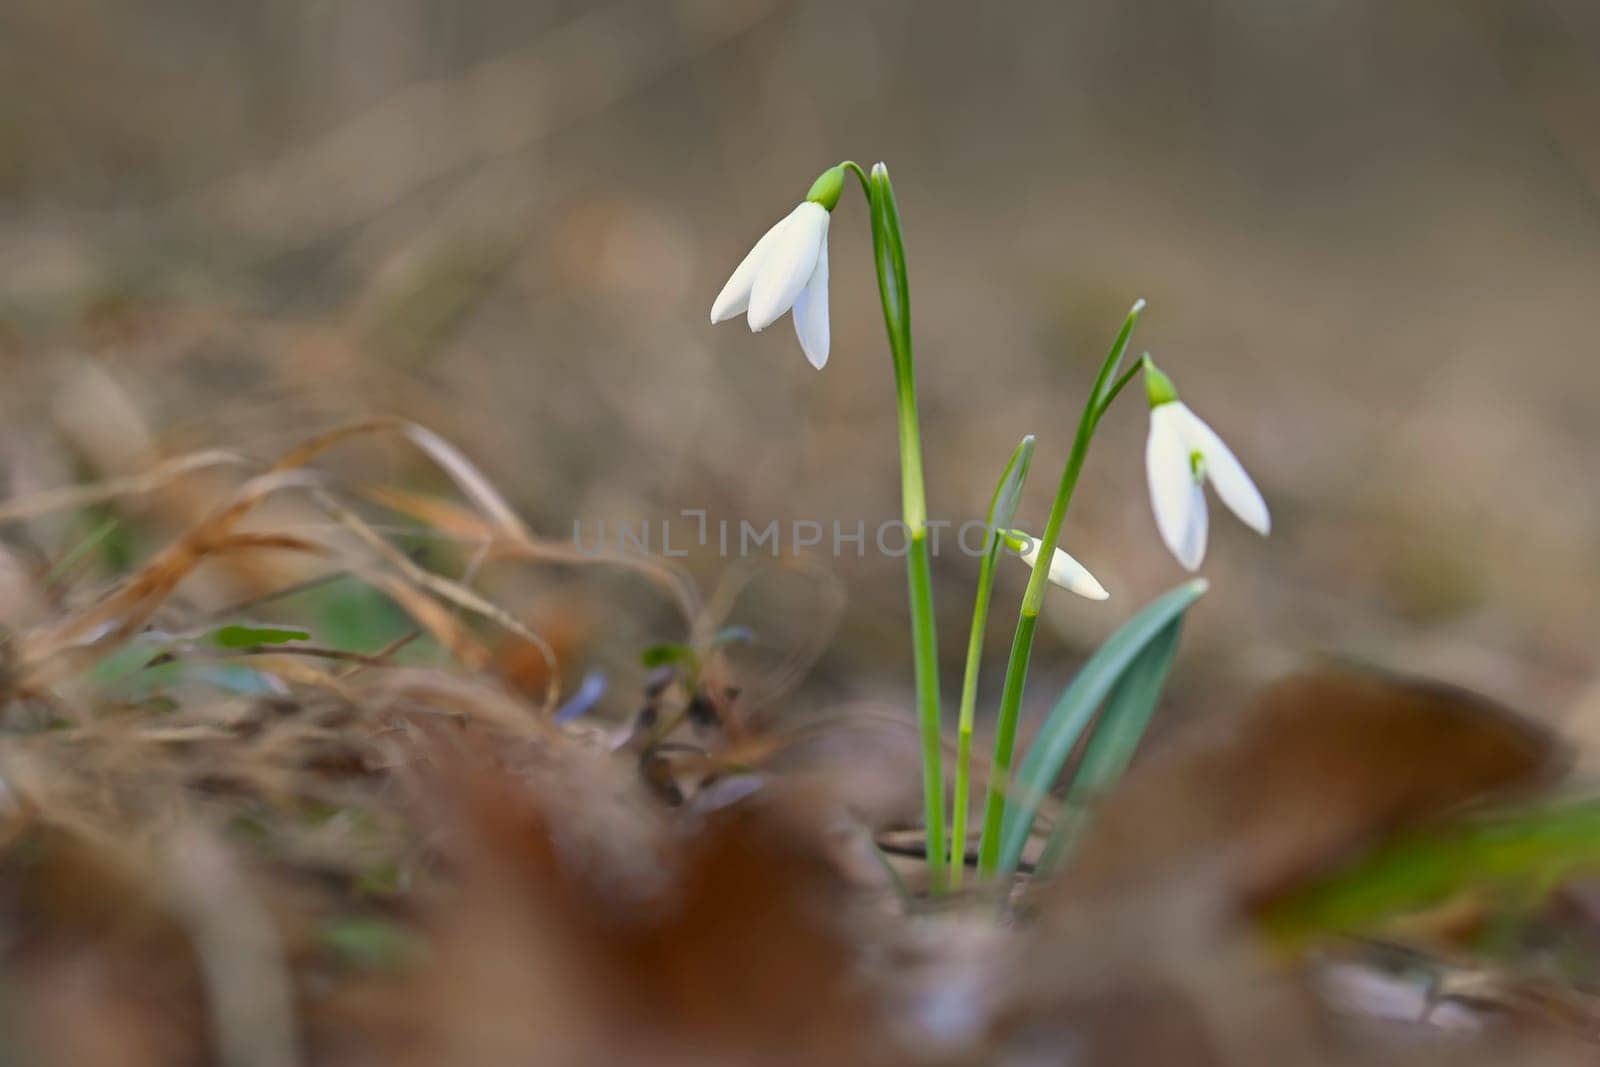 Snowdrops spring flowers. Beautifully blooming in the grass at sunset. Delicate Snowdrop flower is one of the spring symbols. (Amaryllidaceae - Galanthus nivalis) by Montypeter